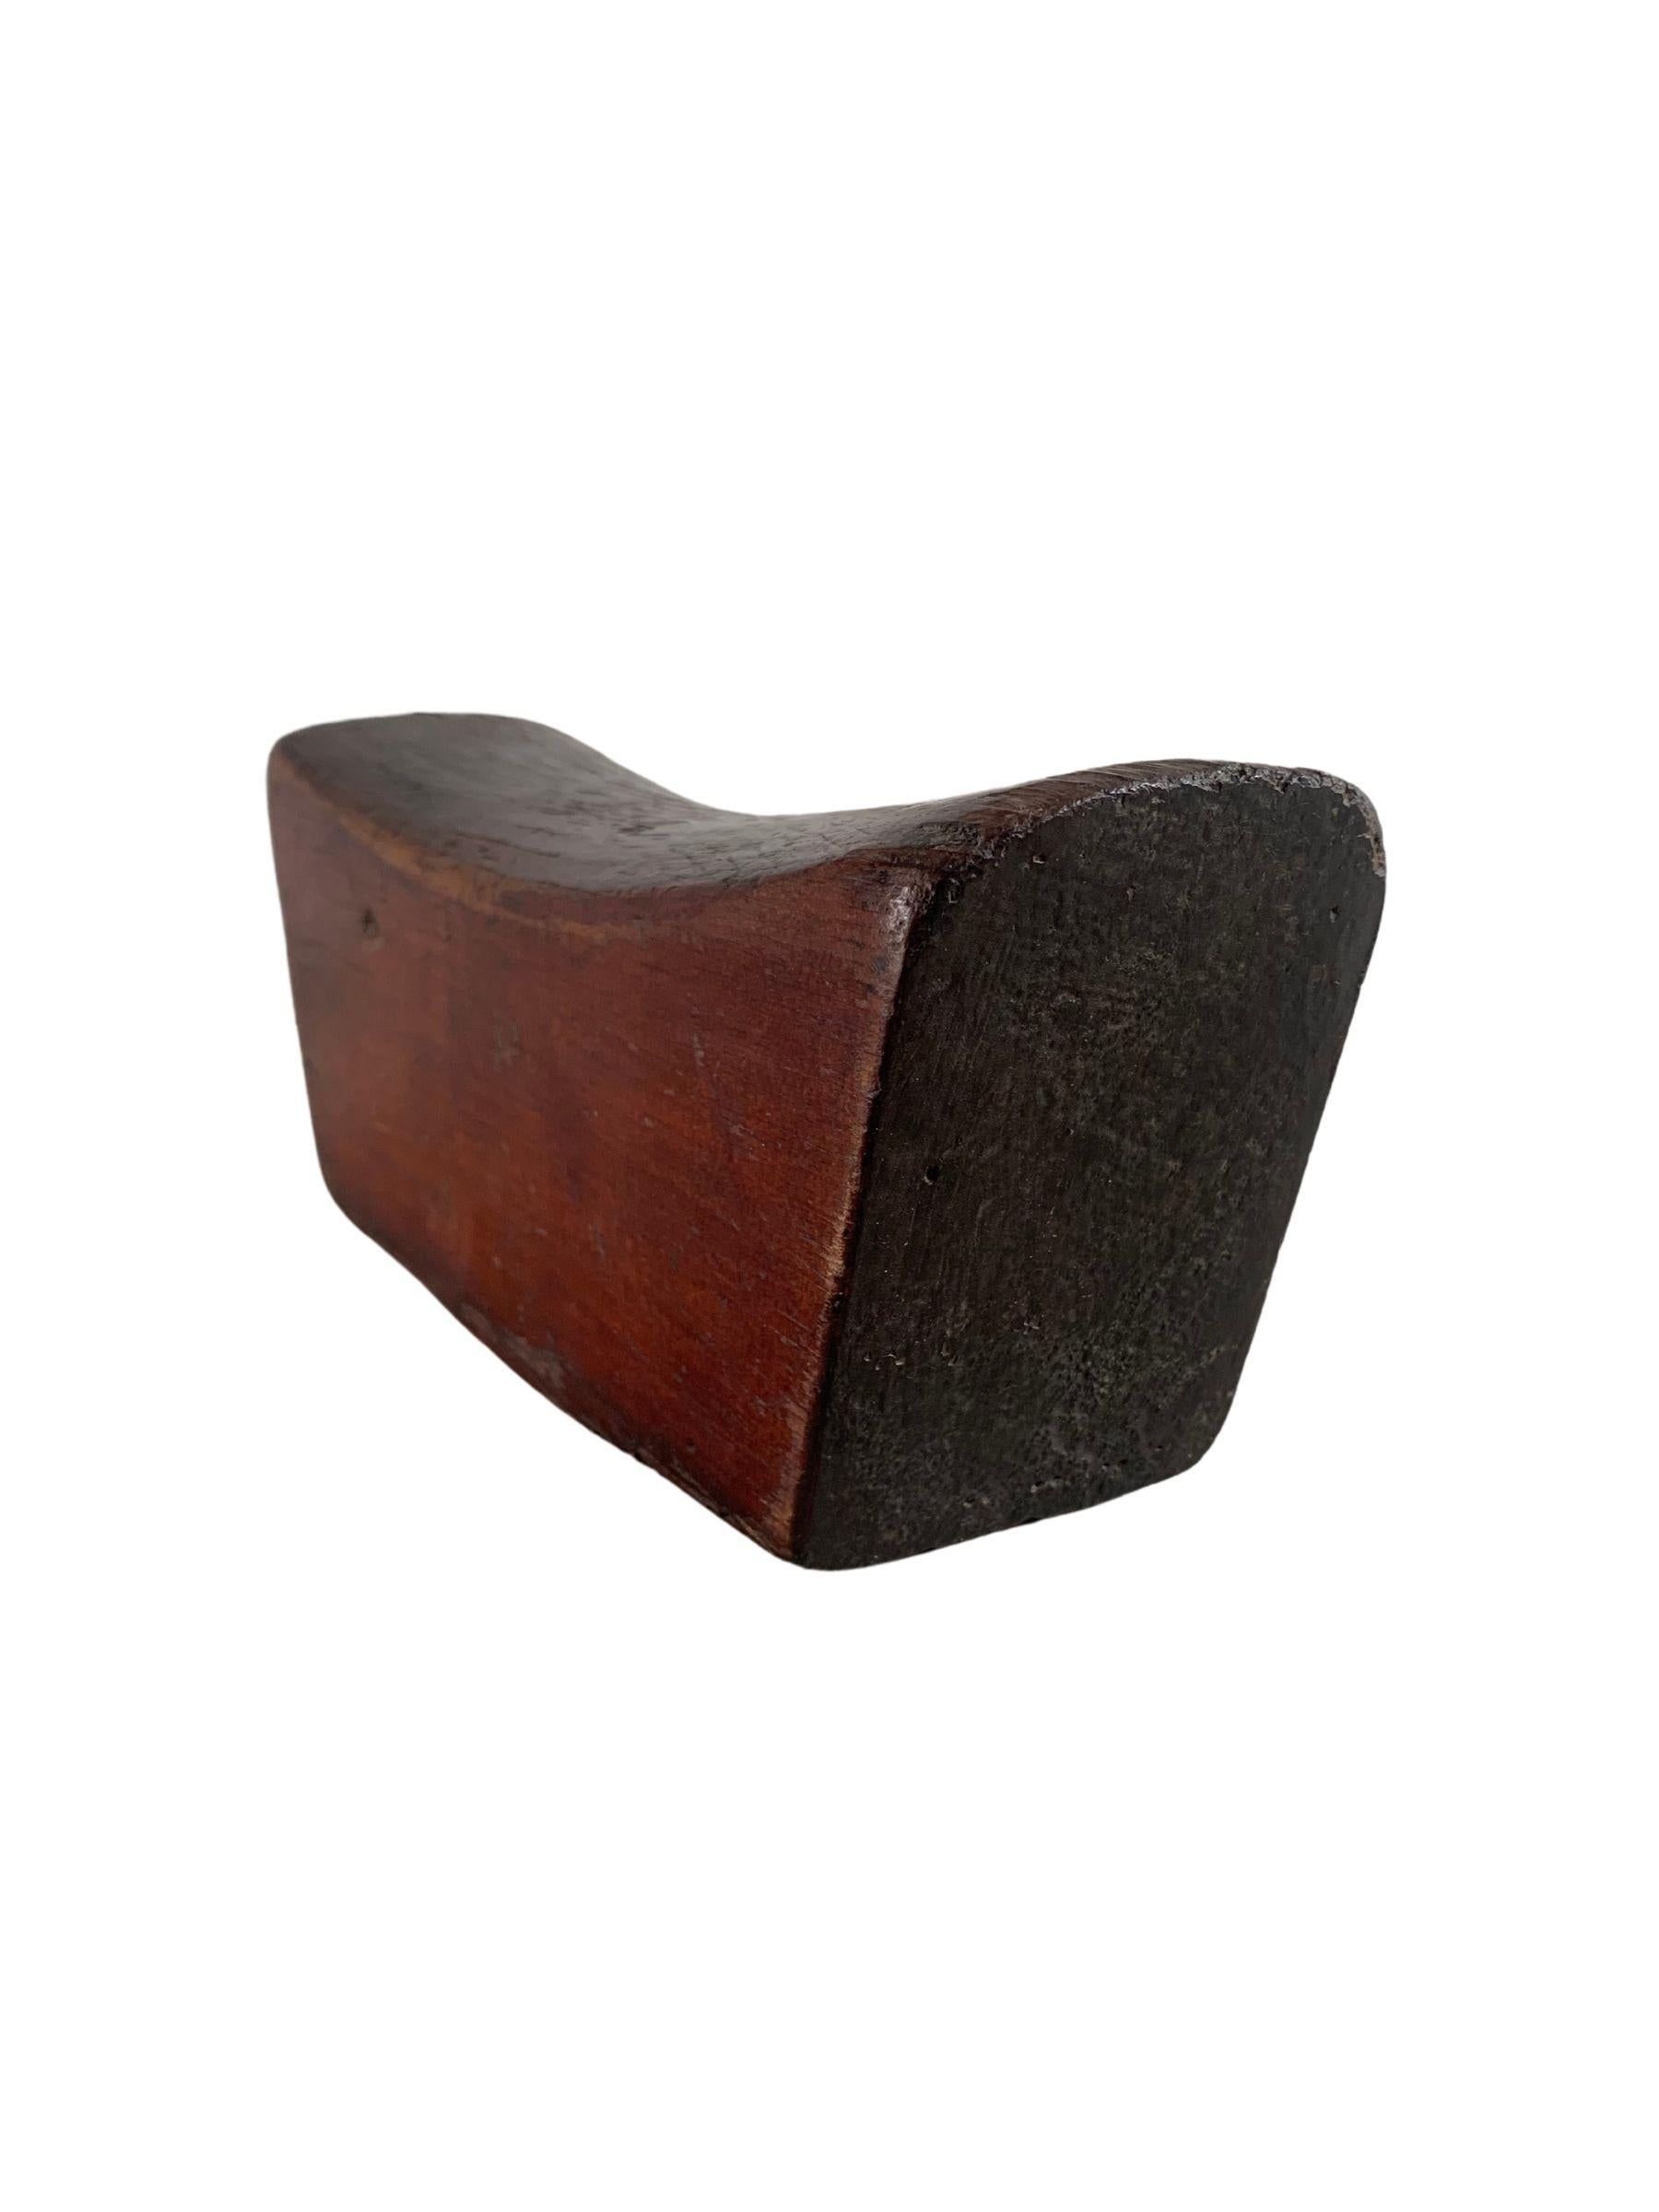 Qing Chinese Elm Wood Headrest from Early 20th Century For Sale